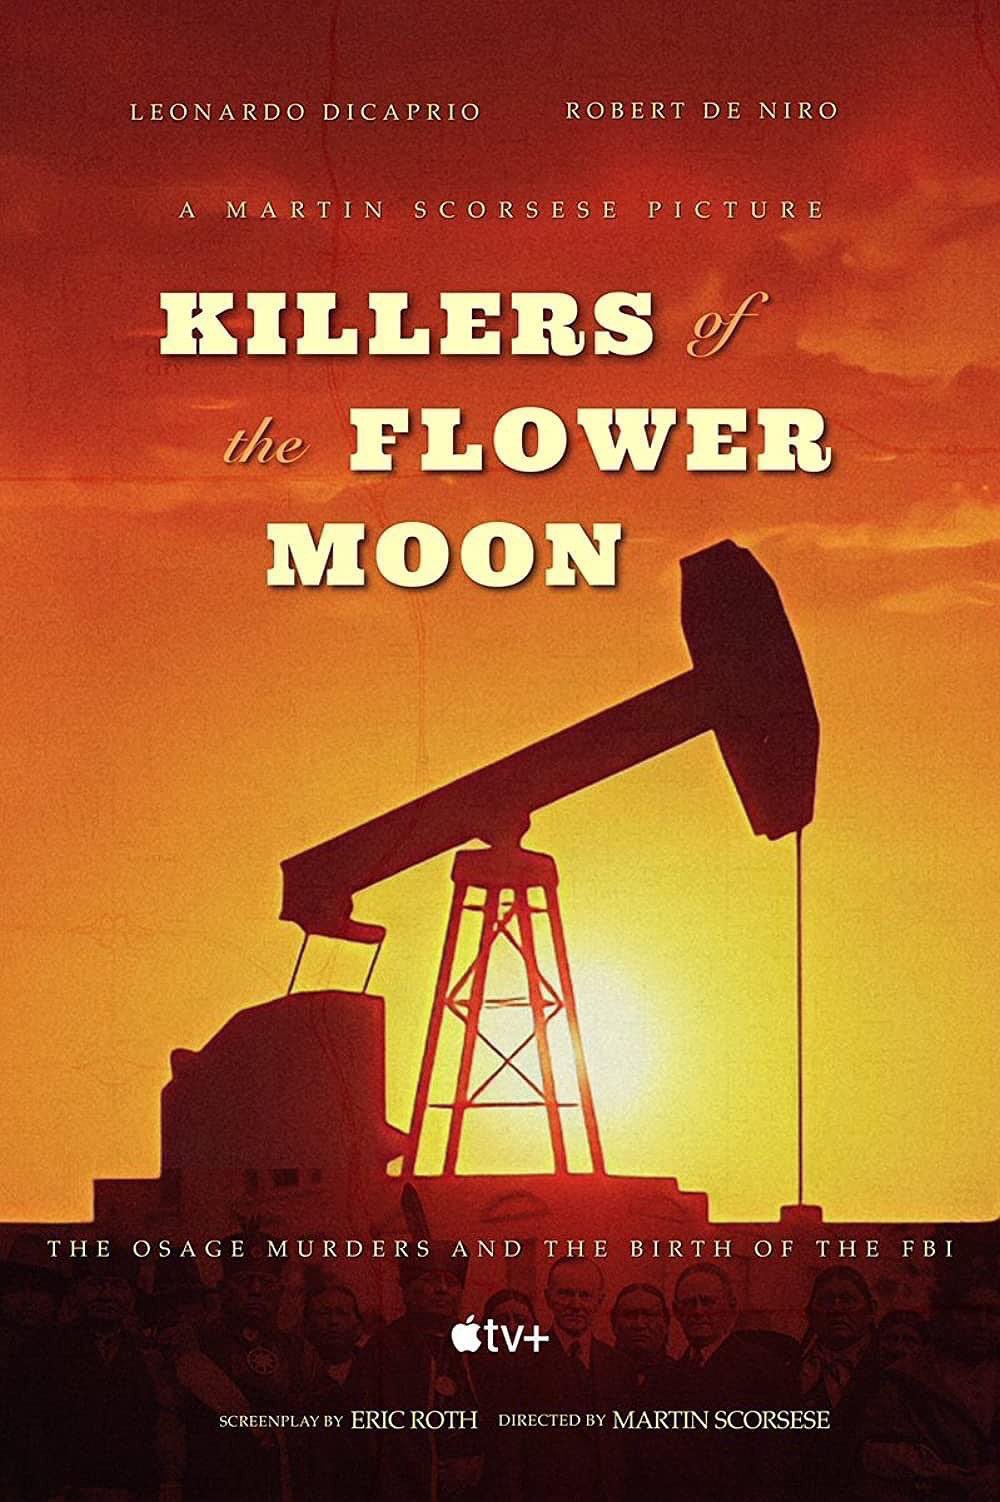 christian movie review killers of the flower moon